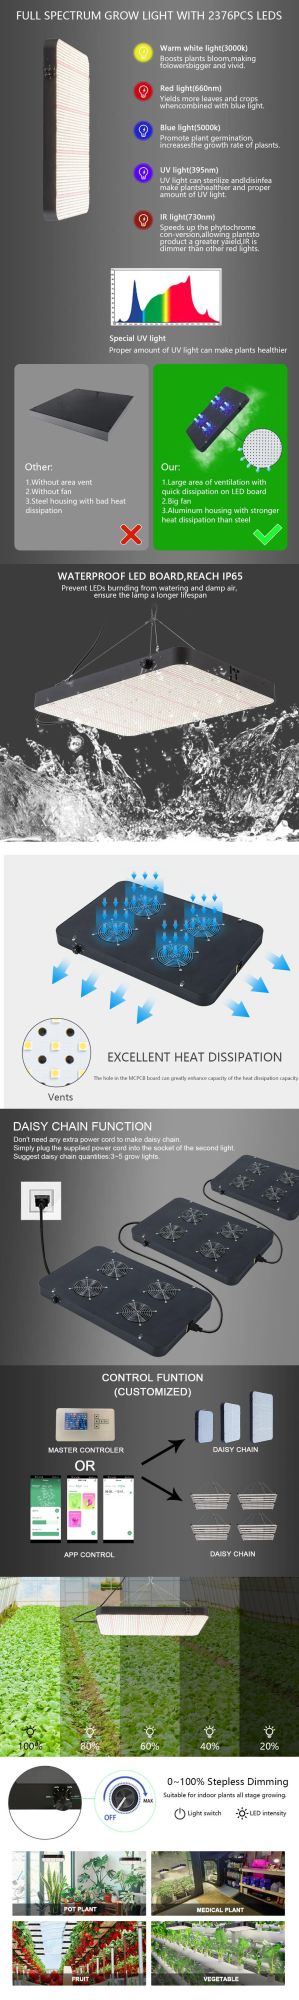 Waterproof Full Spectrum Wavelength, High Performance 1000 Watt LED Panel LED Grow Light for Any Stage of Plant Growth (FCC CE RoHS Certificate)